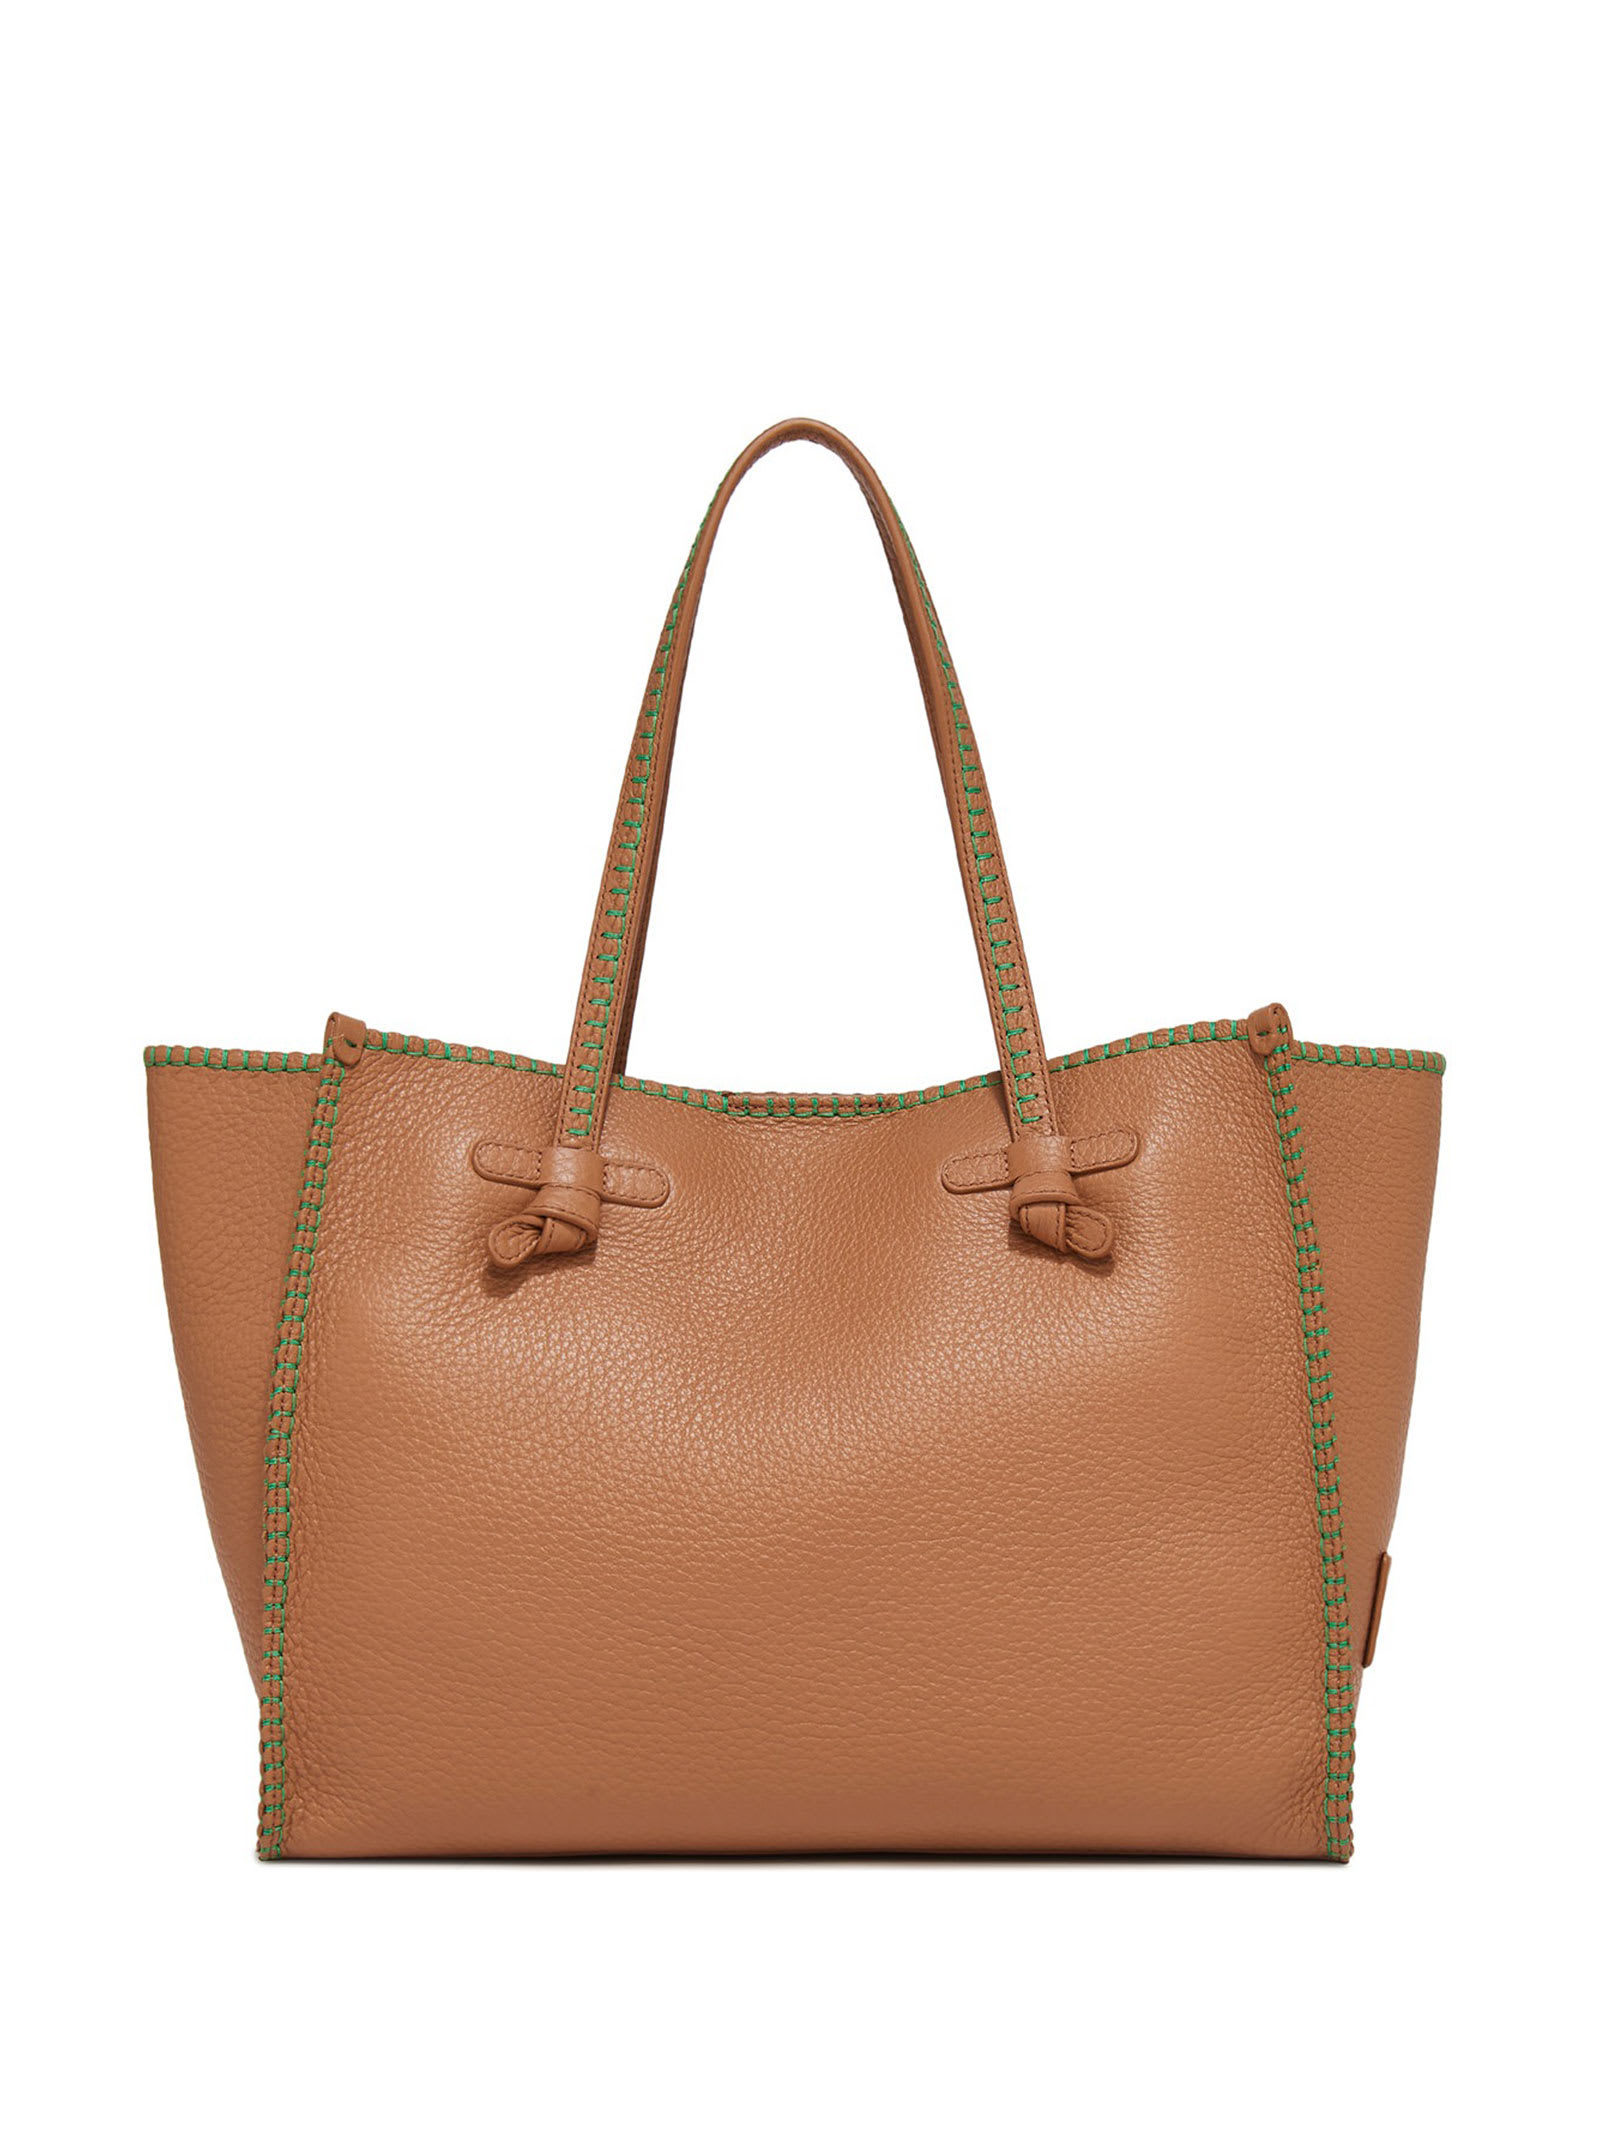 Shop Gianni Chiarini Marcella Shopping Bag In Bubble Leather In Toffee